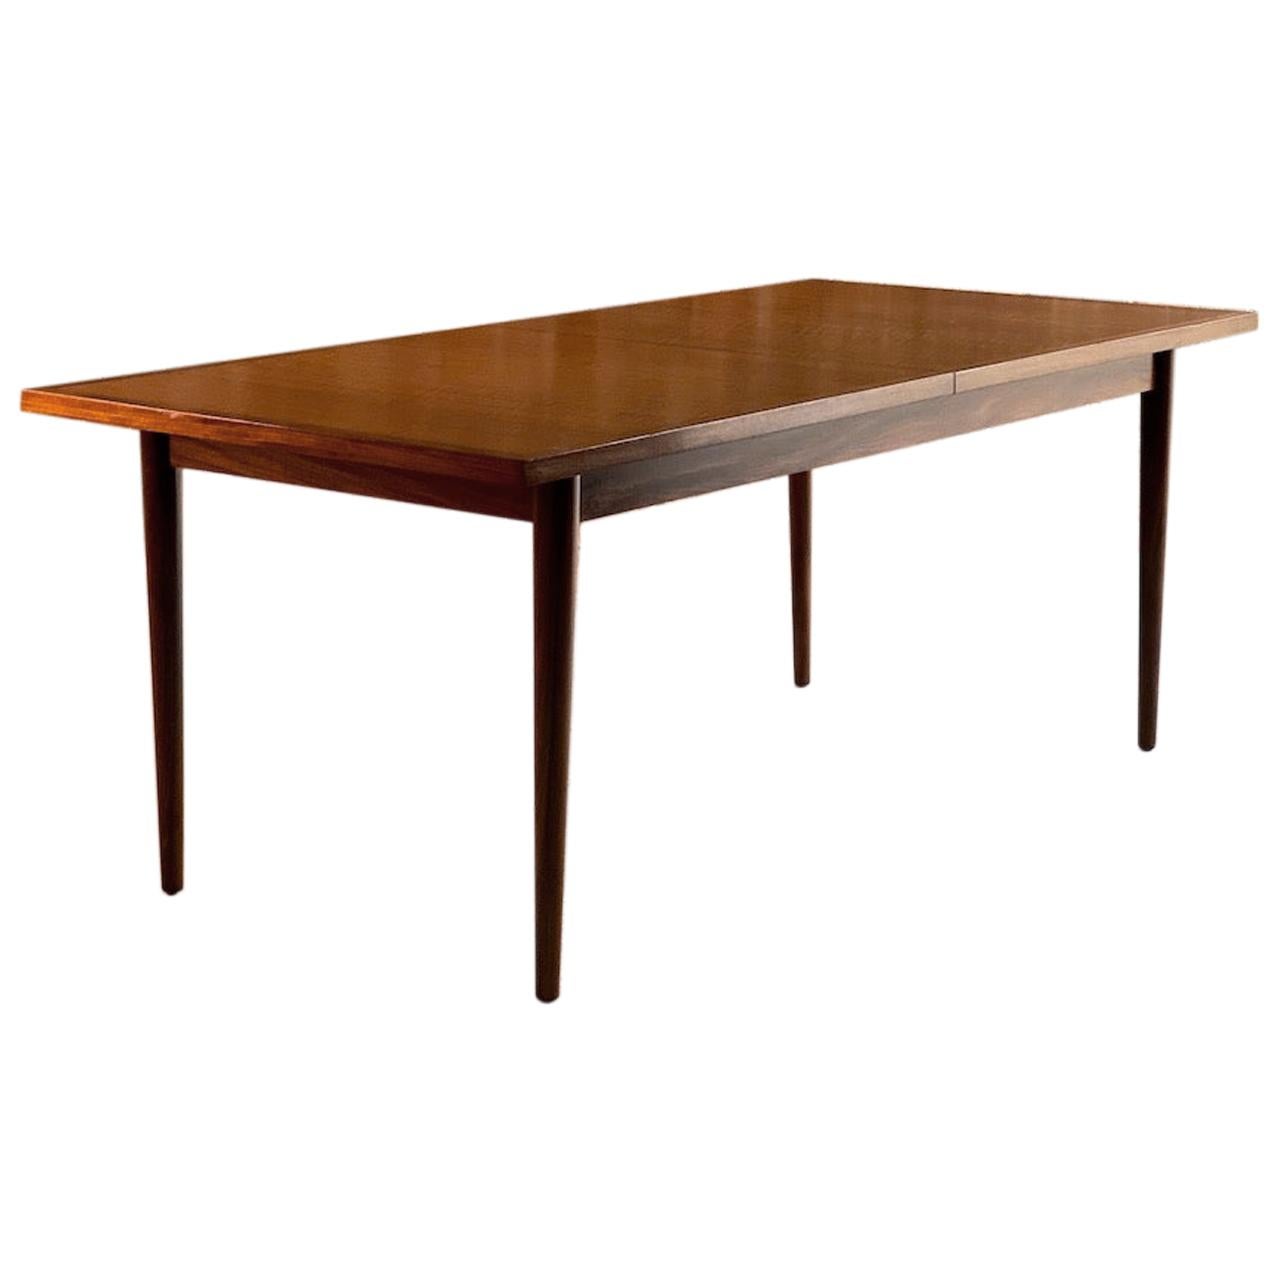 Robert Heritage Walnut and Teak Dining Table for Archie Shine, circa 1960